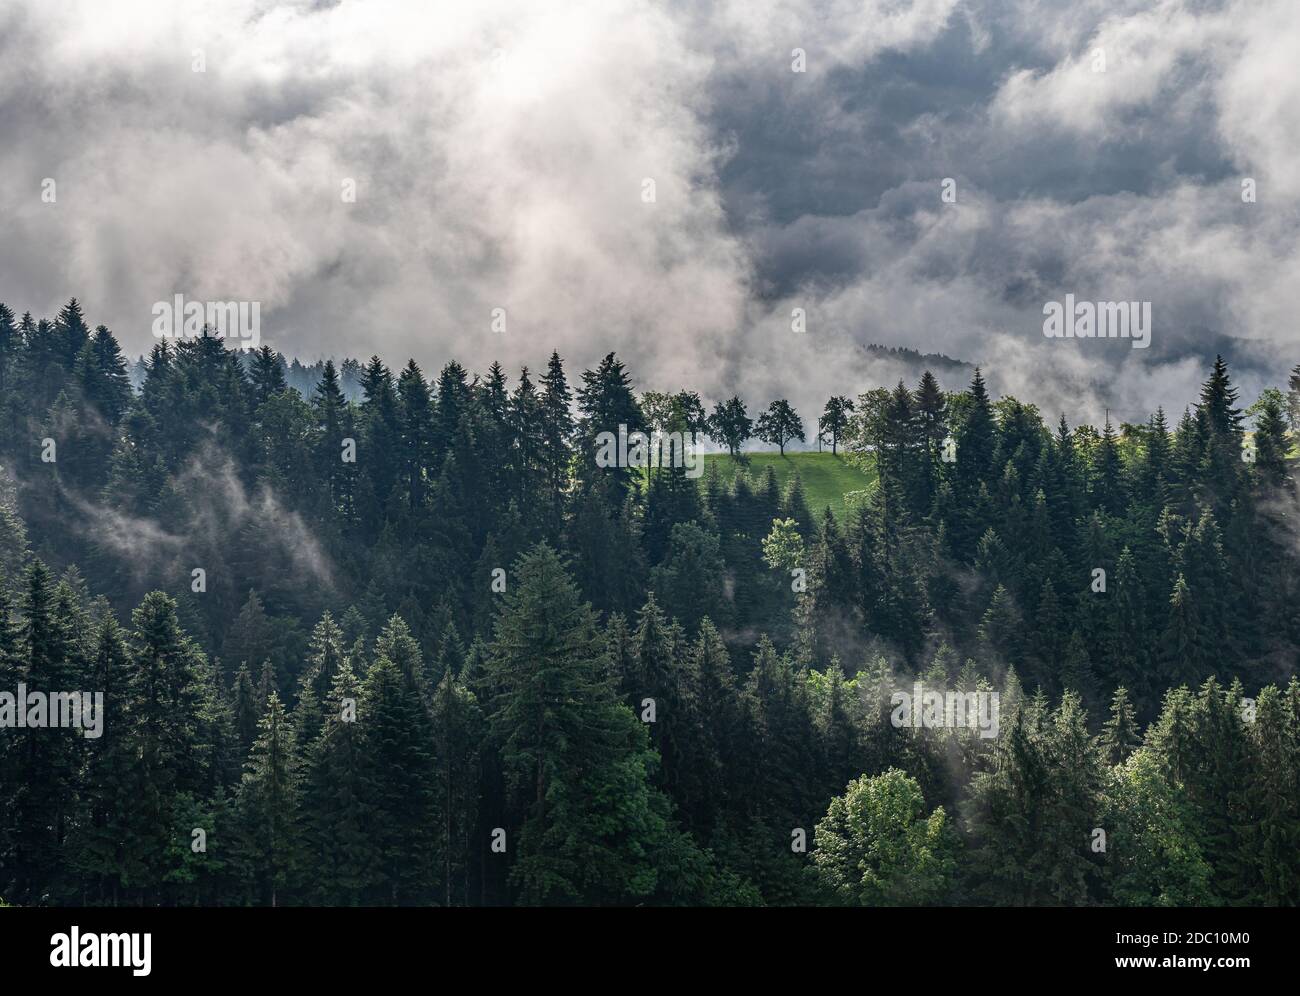 view on mystic trees in black forest, germany Stock Photo